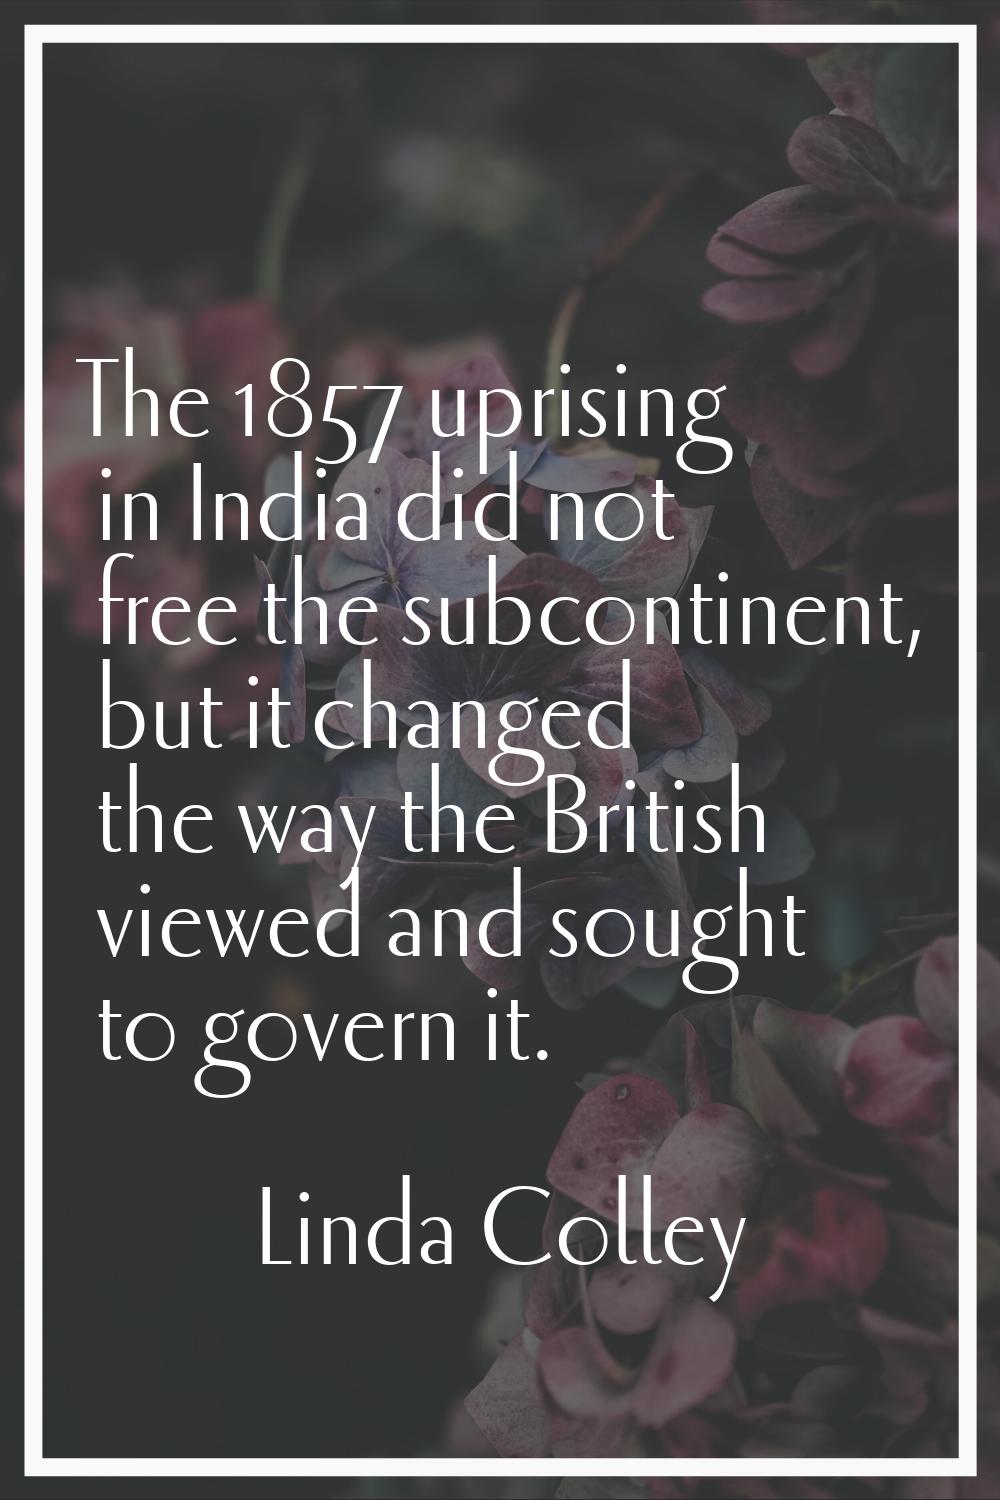 The 1857 uprising in India did not free the subcontinent, but it changed the way the British viewed